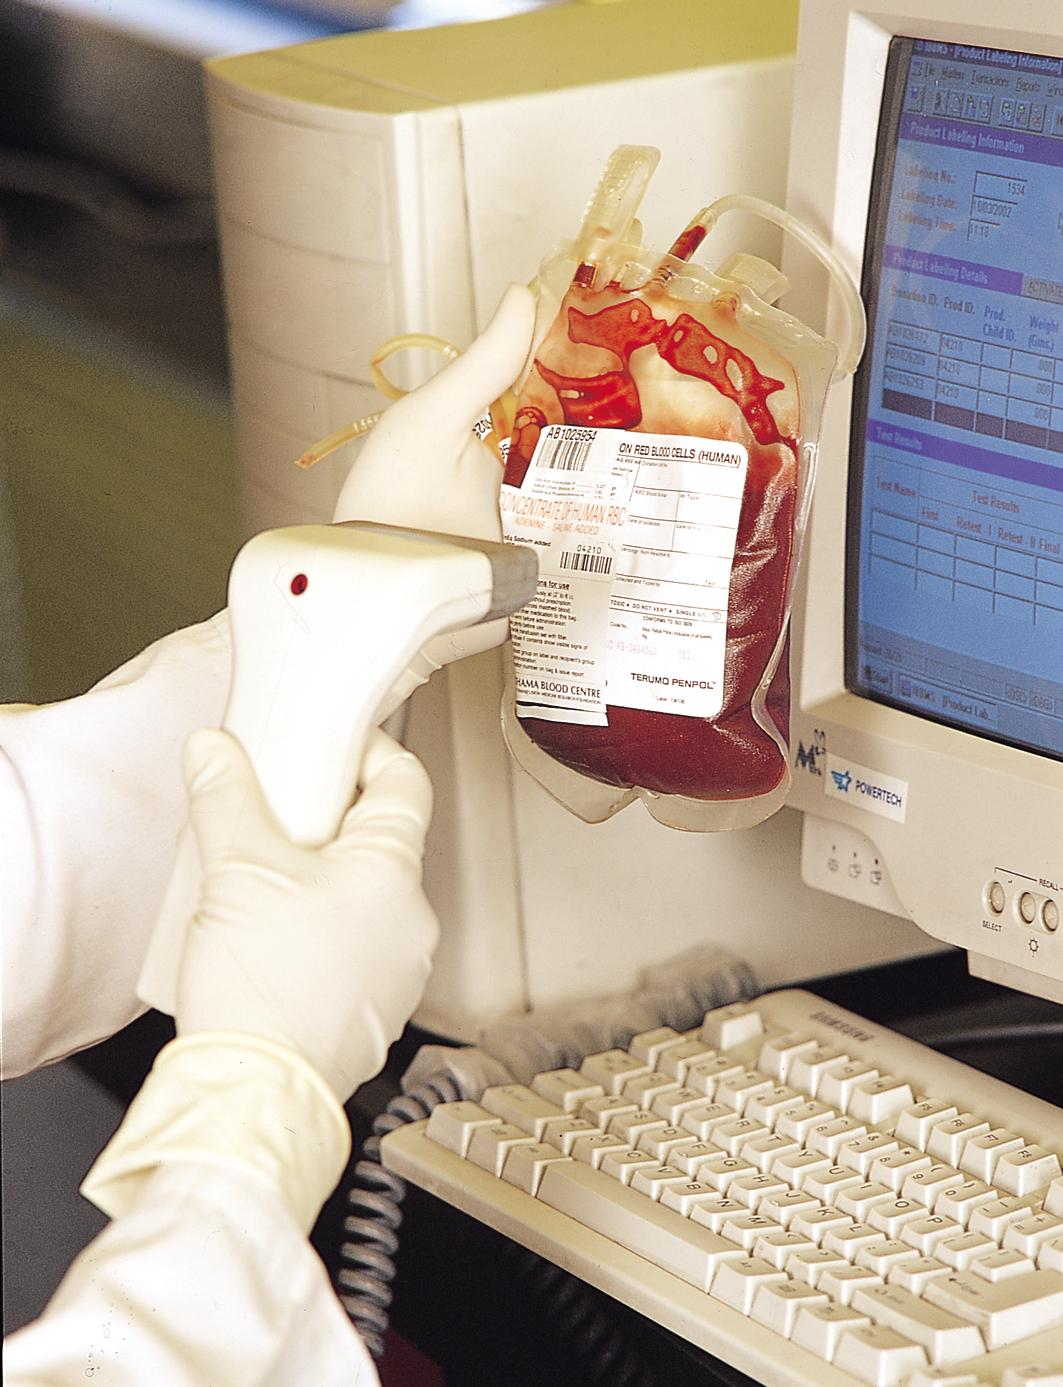 Automated blood issue to needy patient